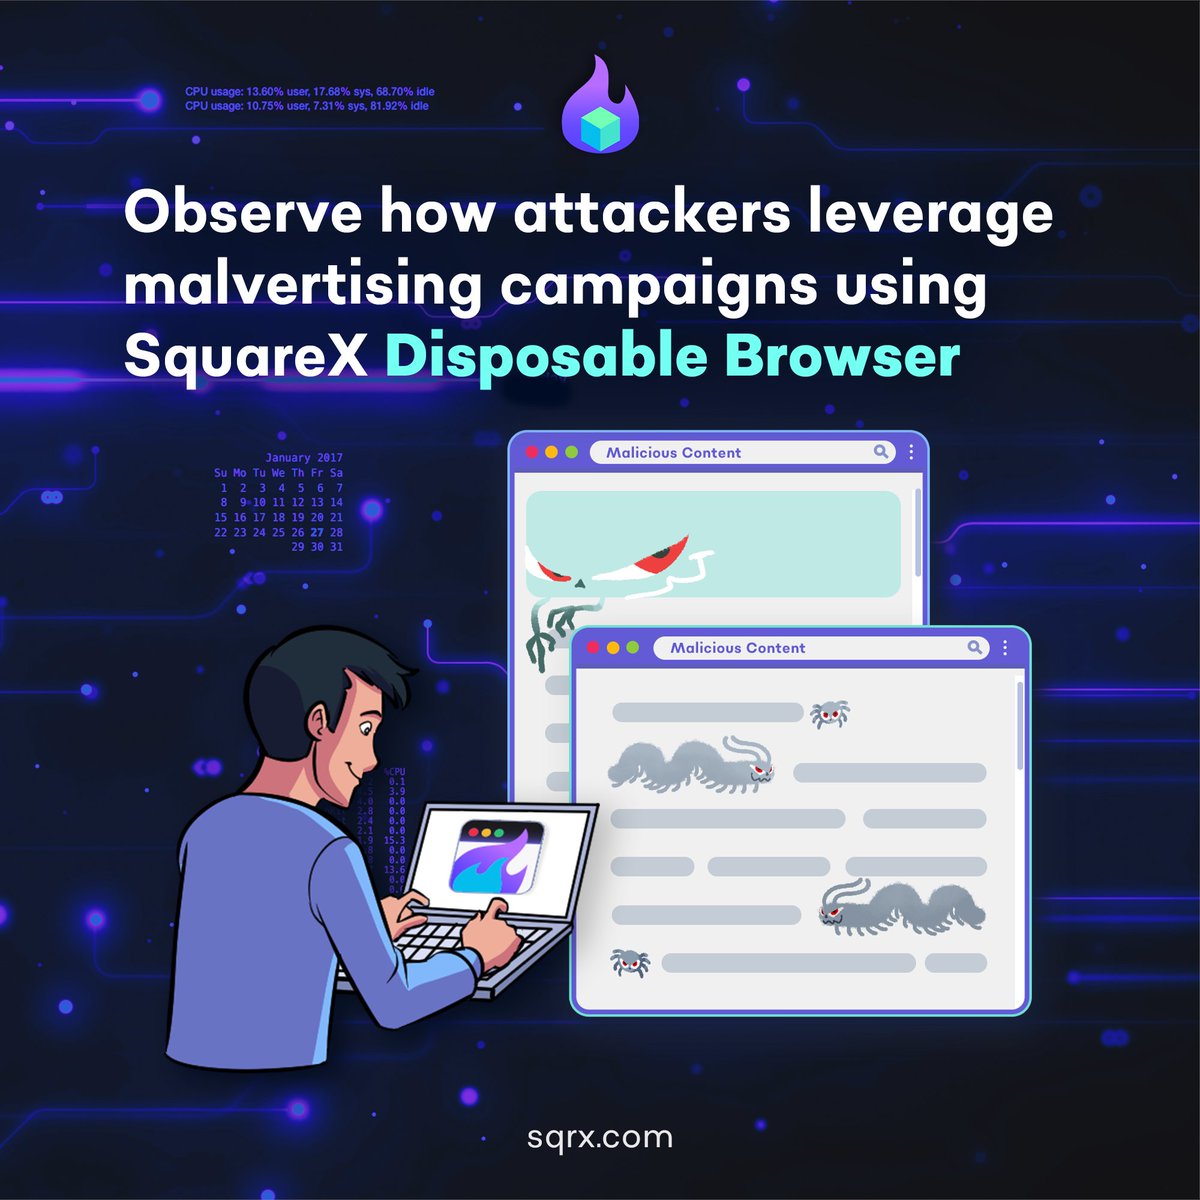 Malware analysts can leverage #SquareX's Disposable Browser to analyze malvertising campaigns with safety. 

Investigate suspicious ads on risky websites without risking your own system so you can strengthen #cybersecurity defences against malvertising: sqrx.io/651eg